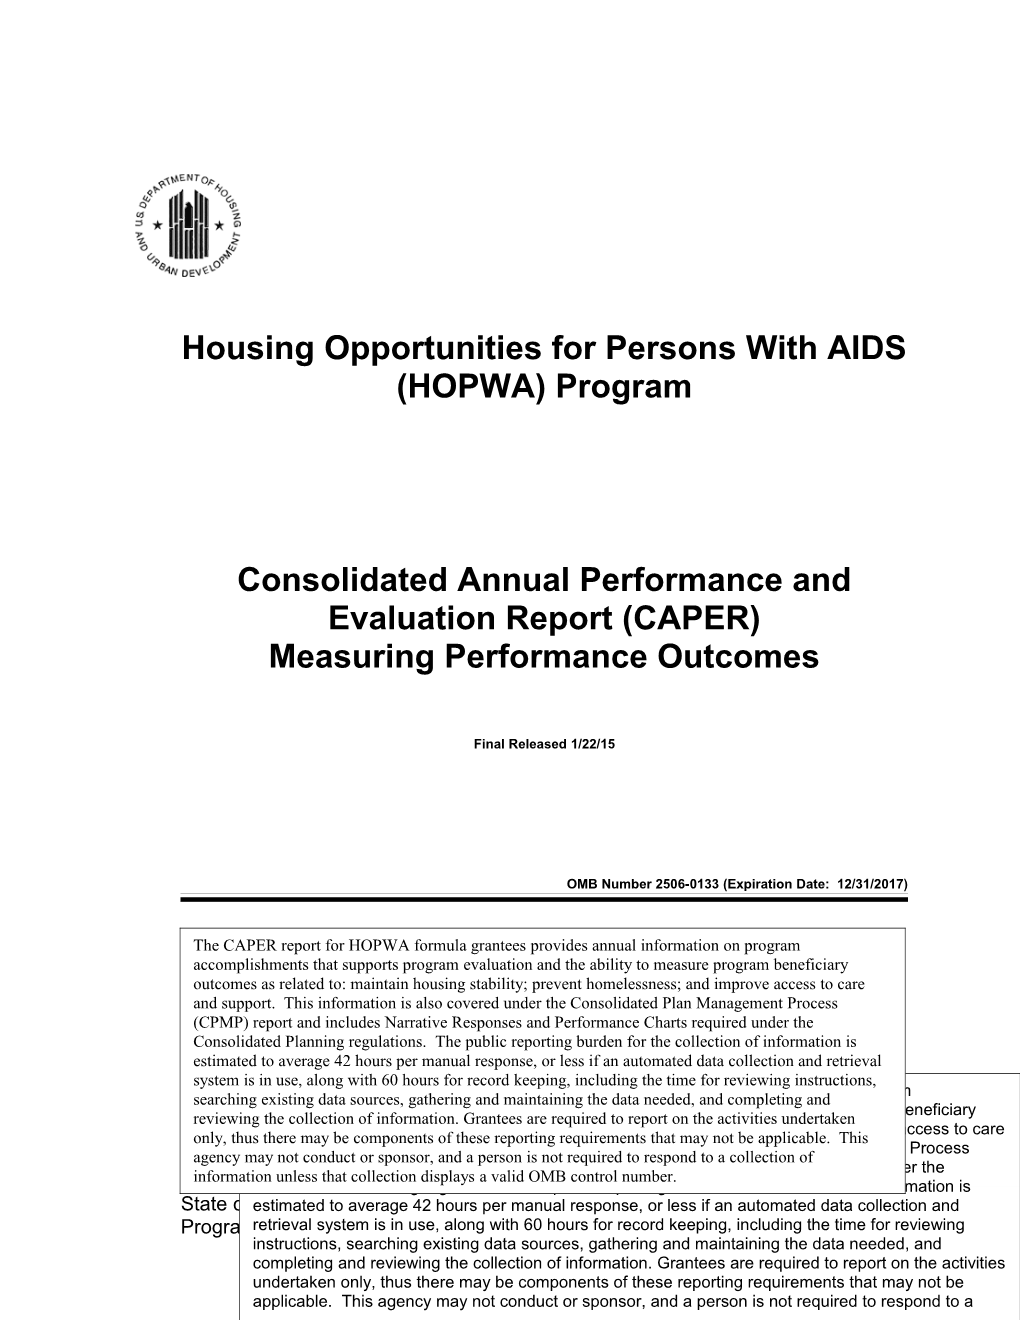 Housing Opportunities for Persons with AIDS (HOPWA) Program